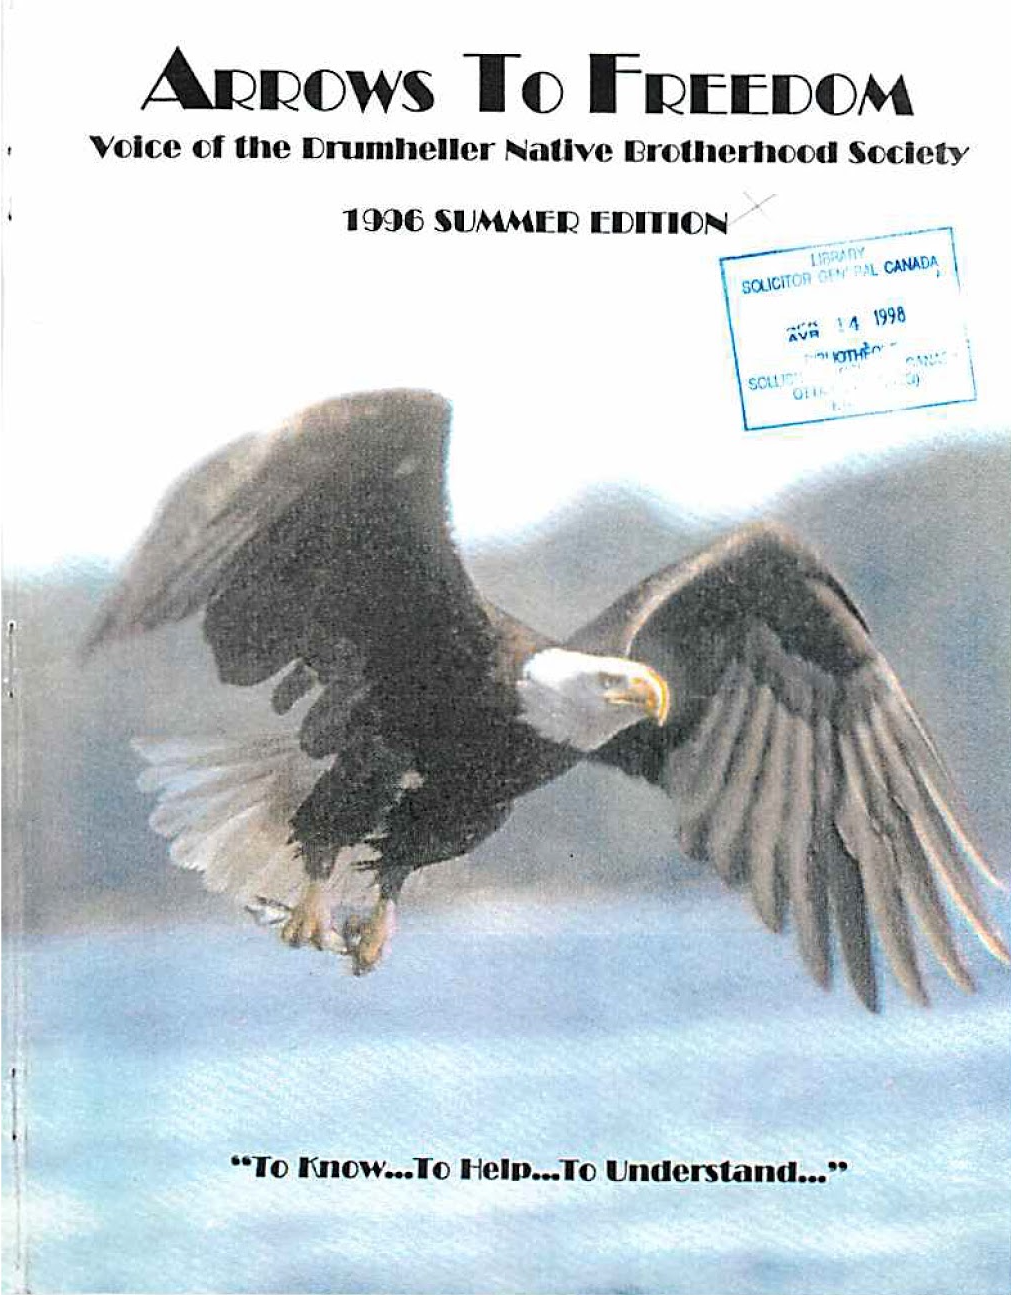 The cover of Arrows to Freedom (1996), the newsletter of the Drumheller Native Brotherhood Society. There is a photography of an eagle with mountains and water in the background. The title of the newsletter is at the top of the image.